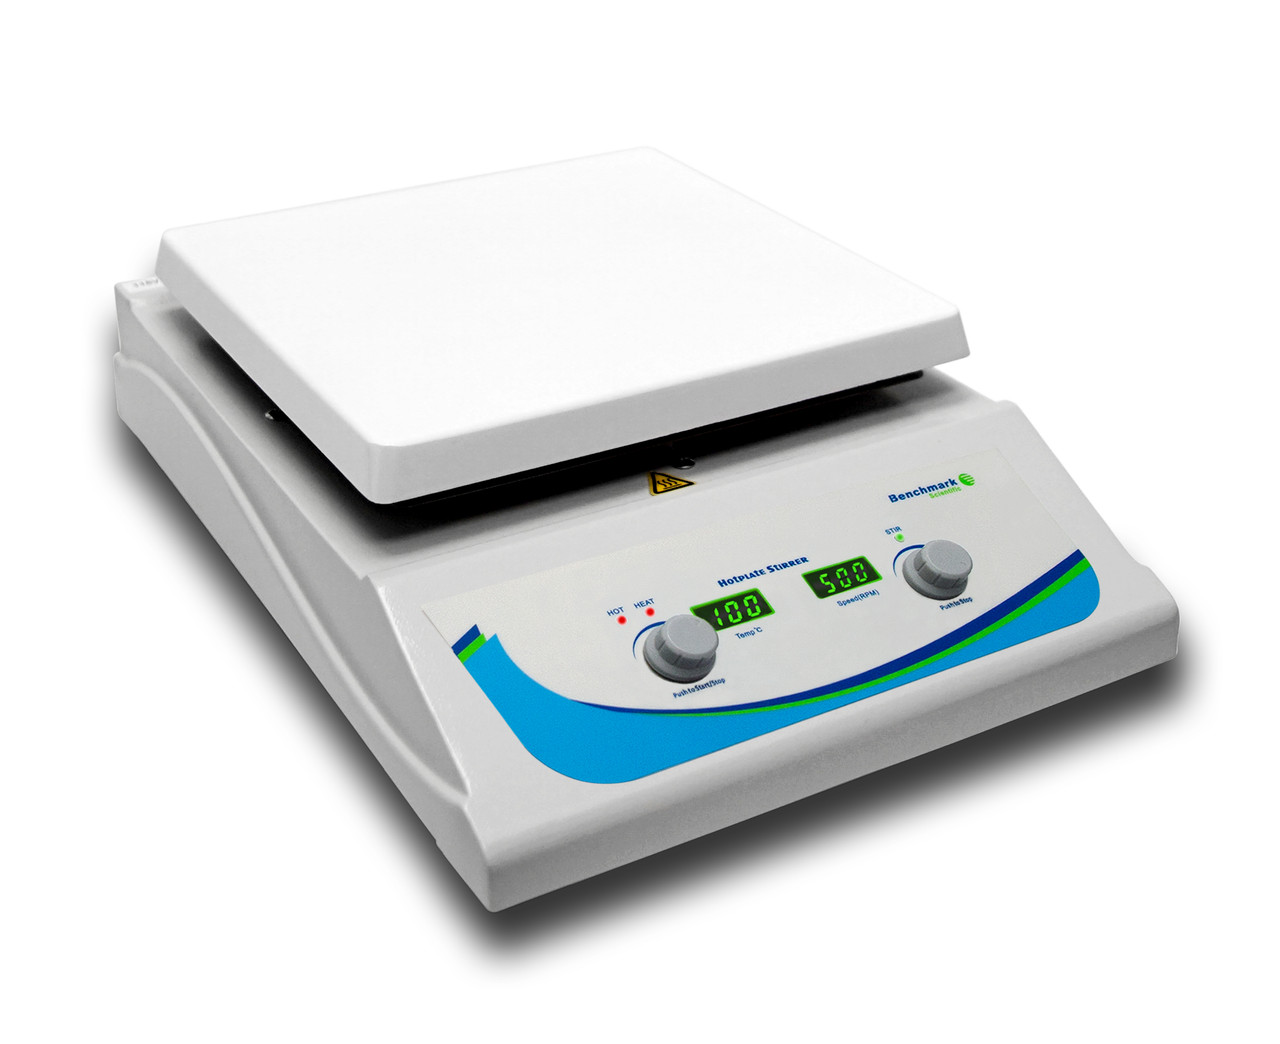 https://cdn11.bigcommerce.com/s-w9bdixgj/images/stencil/1280x1280/products/3298/7247/Benchmark_Scientific_H3710-HS_Hotplate_and_Magnetic_Stirrer_With_10_Inch_Ceramic_Coated_Surface_400C_Maximum_Temperature_and_15L_Stirring_Capacity_-_Lab_Equipment_-_Stellar_Scientific__36395.1585495930.jpg?c=2